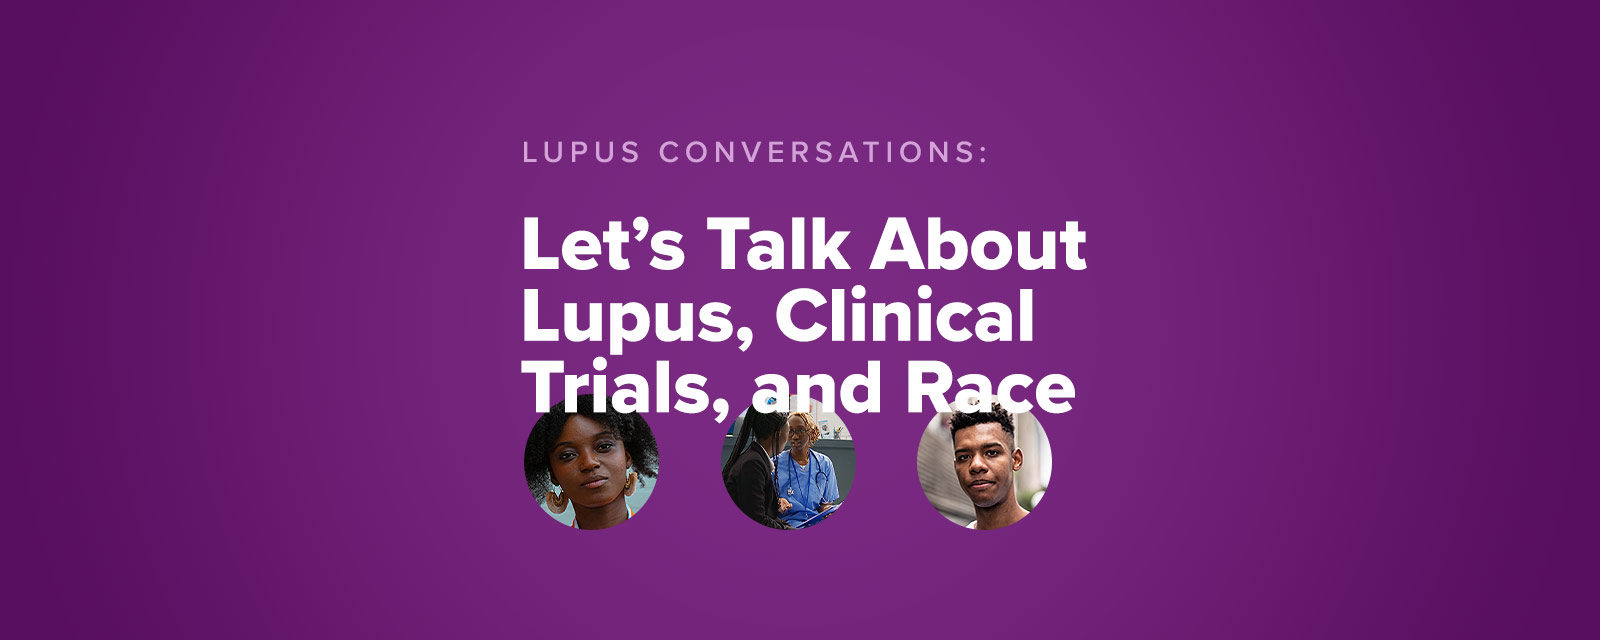 Lupus Conversations: Let’s Talk About Lupus, Clinical Trials, and Race